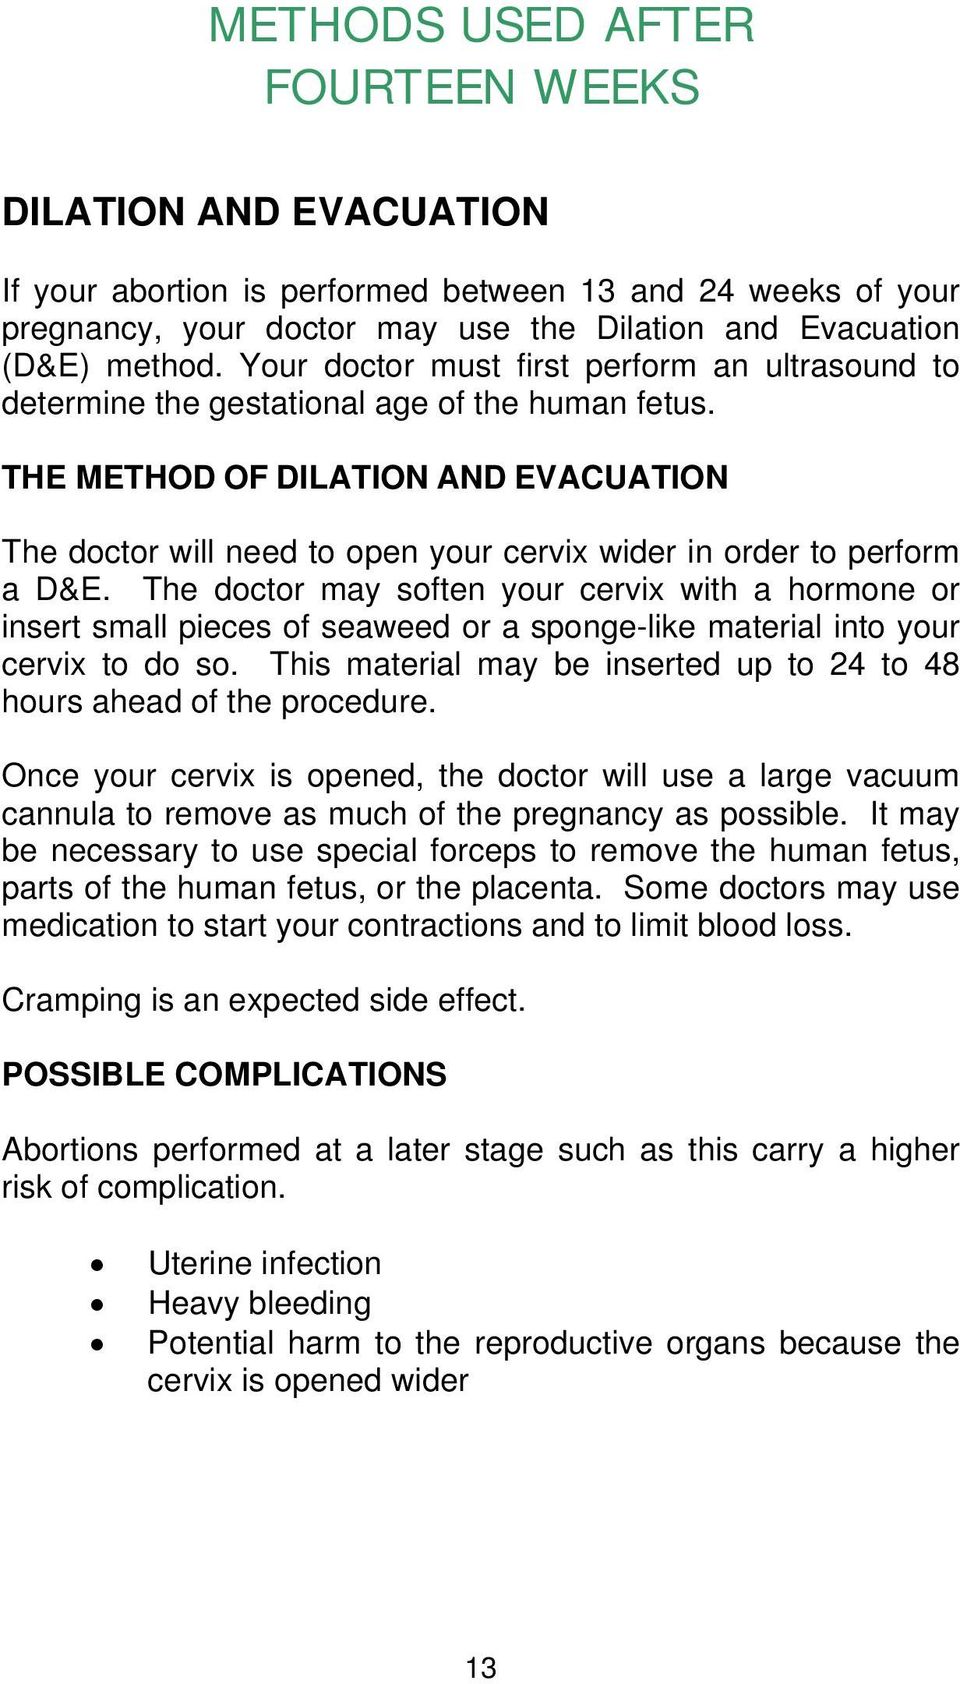 THE METHOD OF DILATION AND EVACUATION The doctor will need to open your cervix wider in order to perform a D&E.